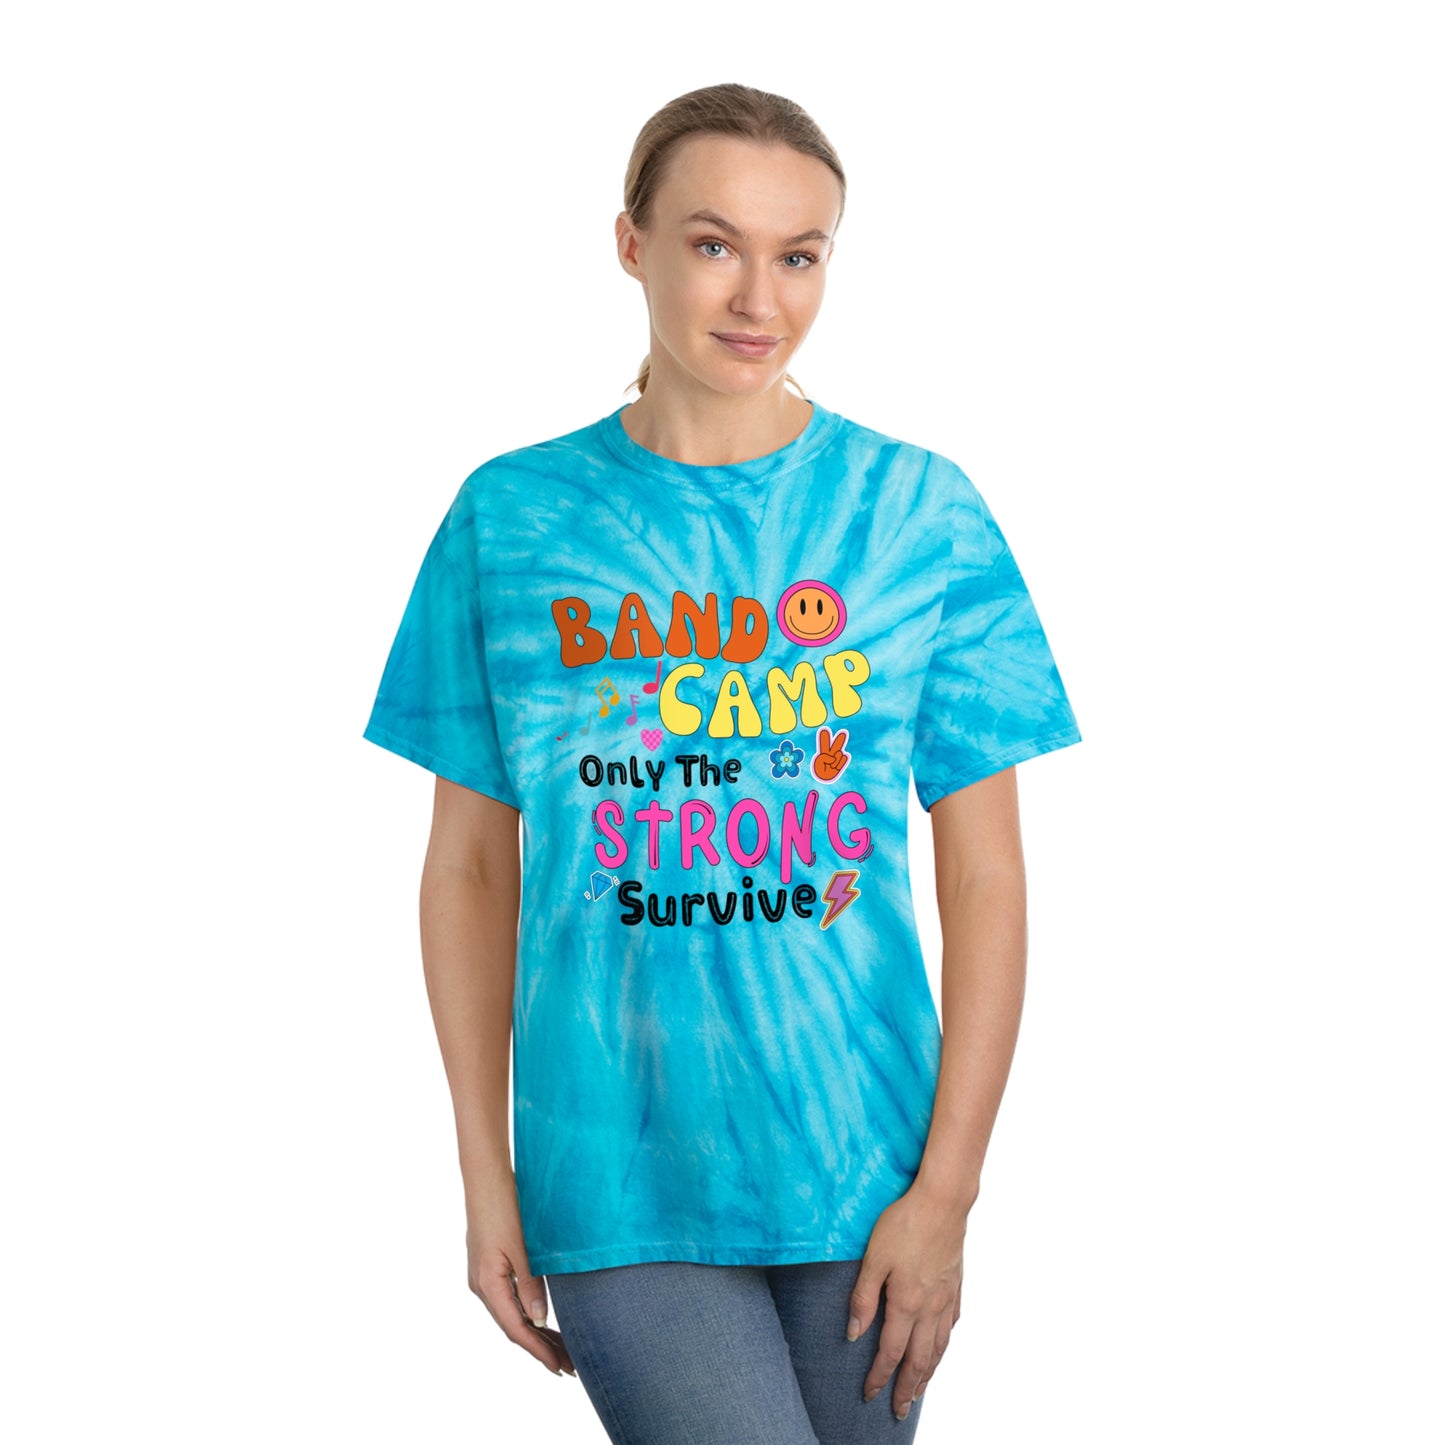 Band Camp Only the Strong Survive Retro Cyclone Tie-Dye Tee, Birthday Gift for Marching Band Friend